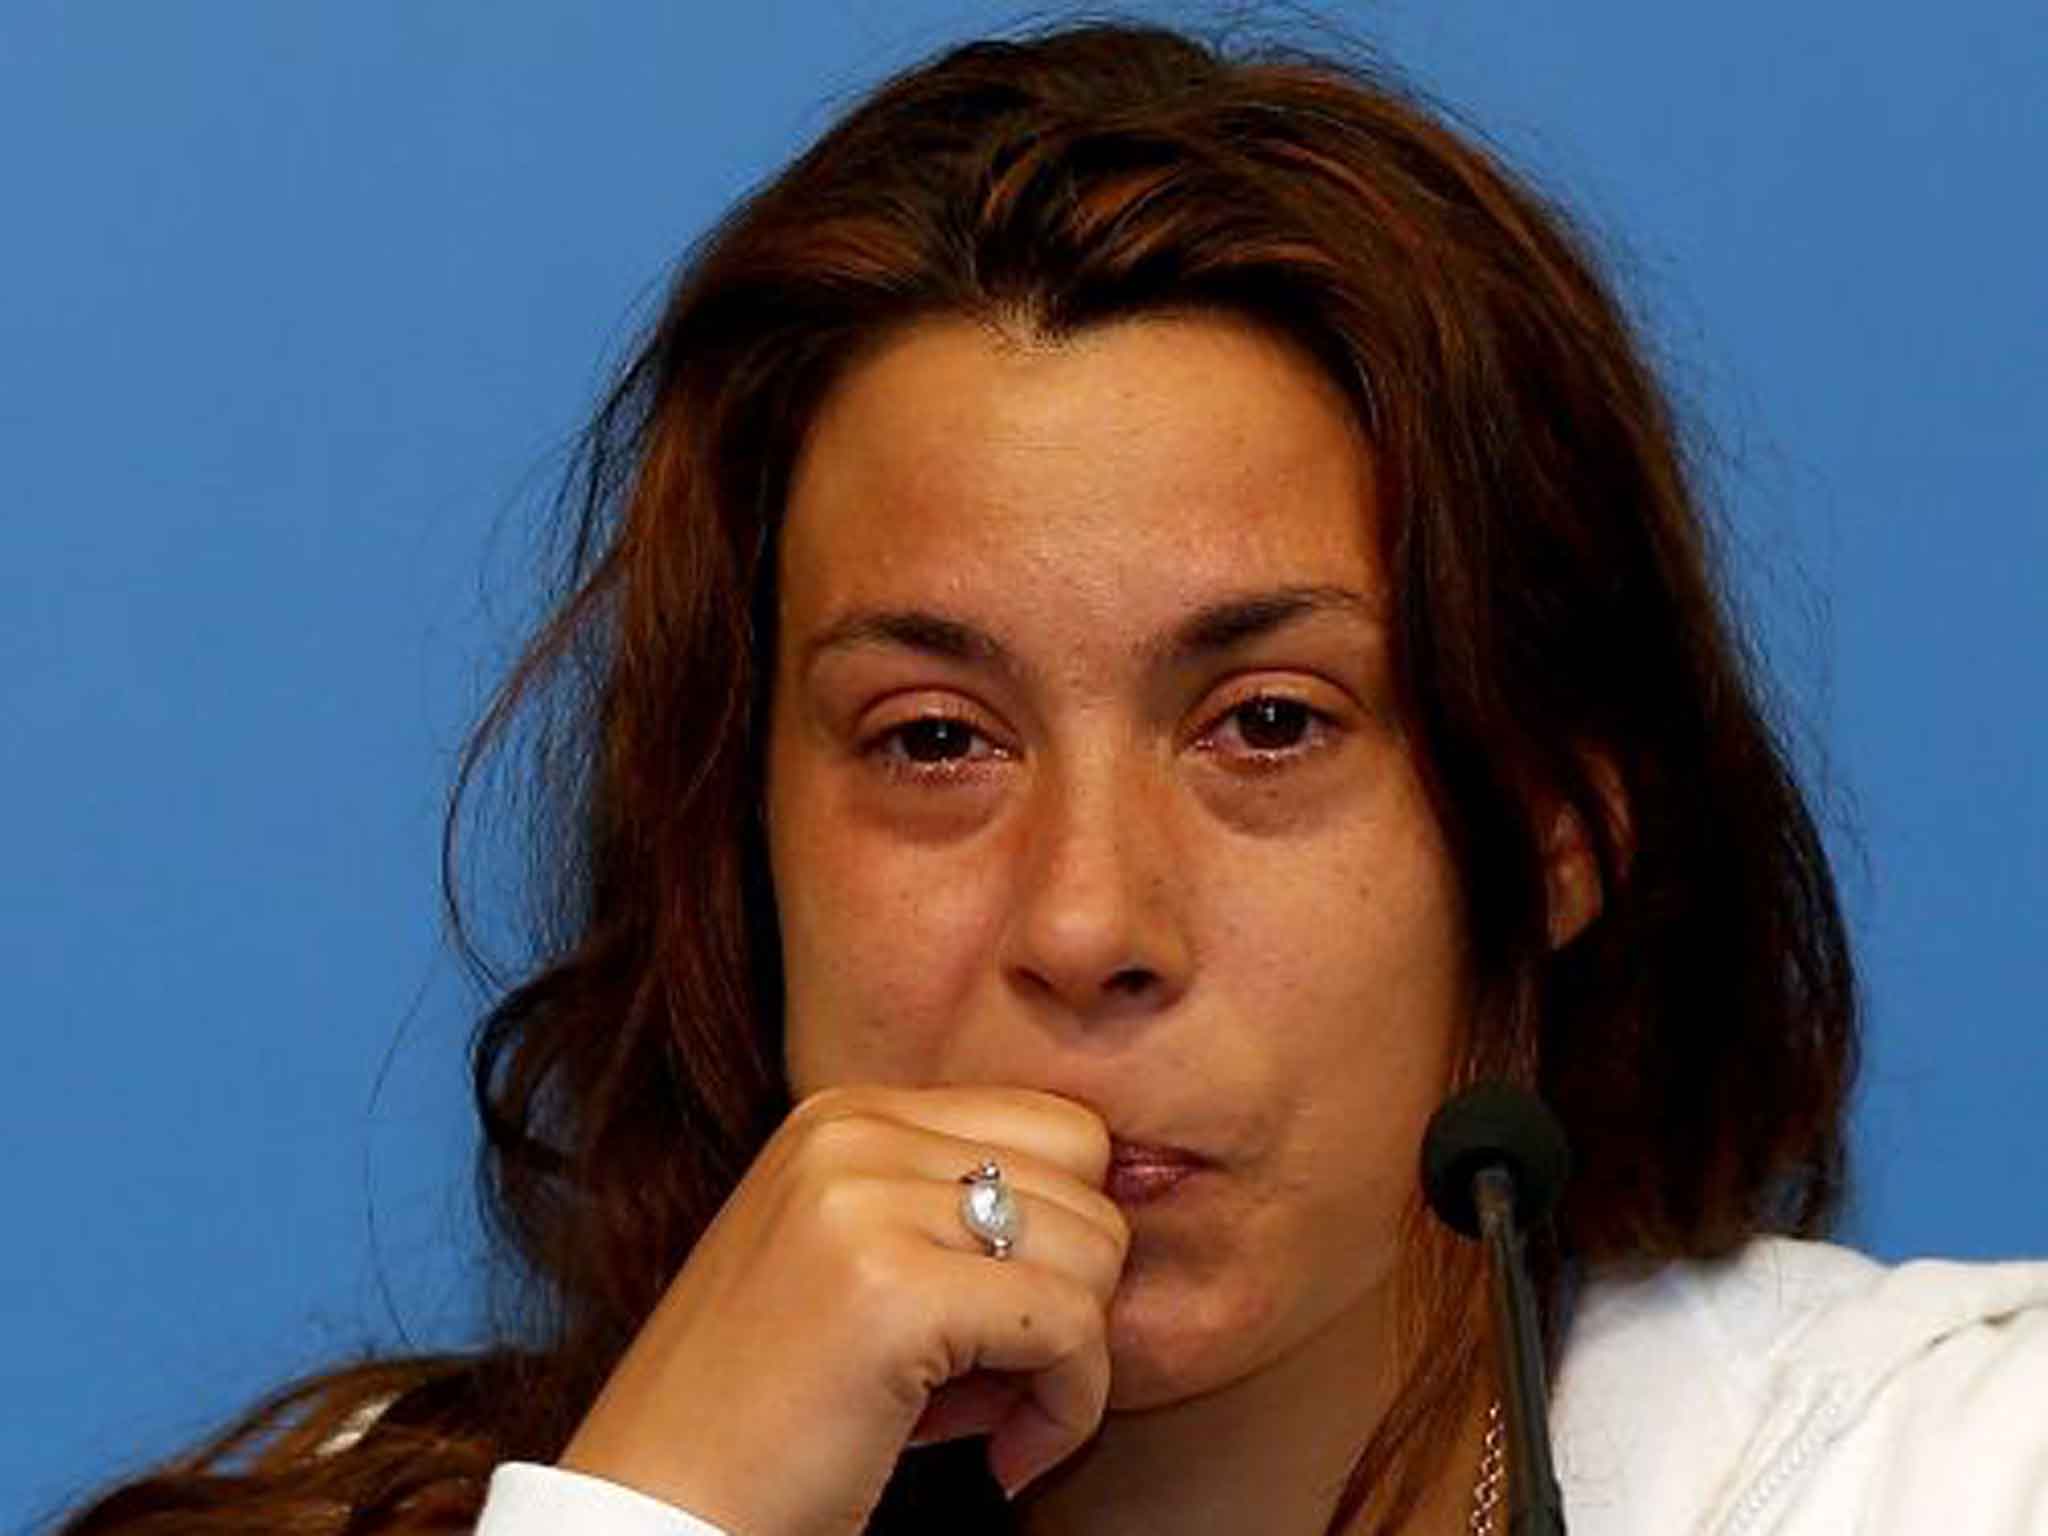 A tearful Marion Bartoli informs the media of her retirement